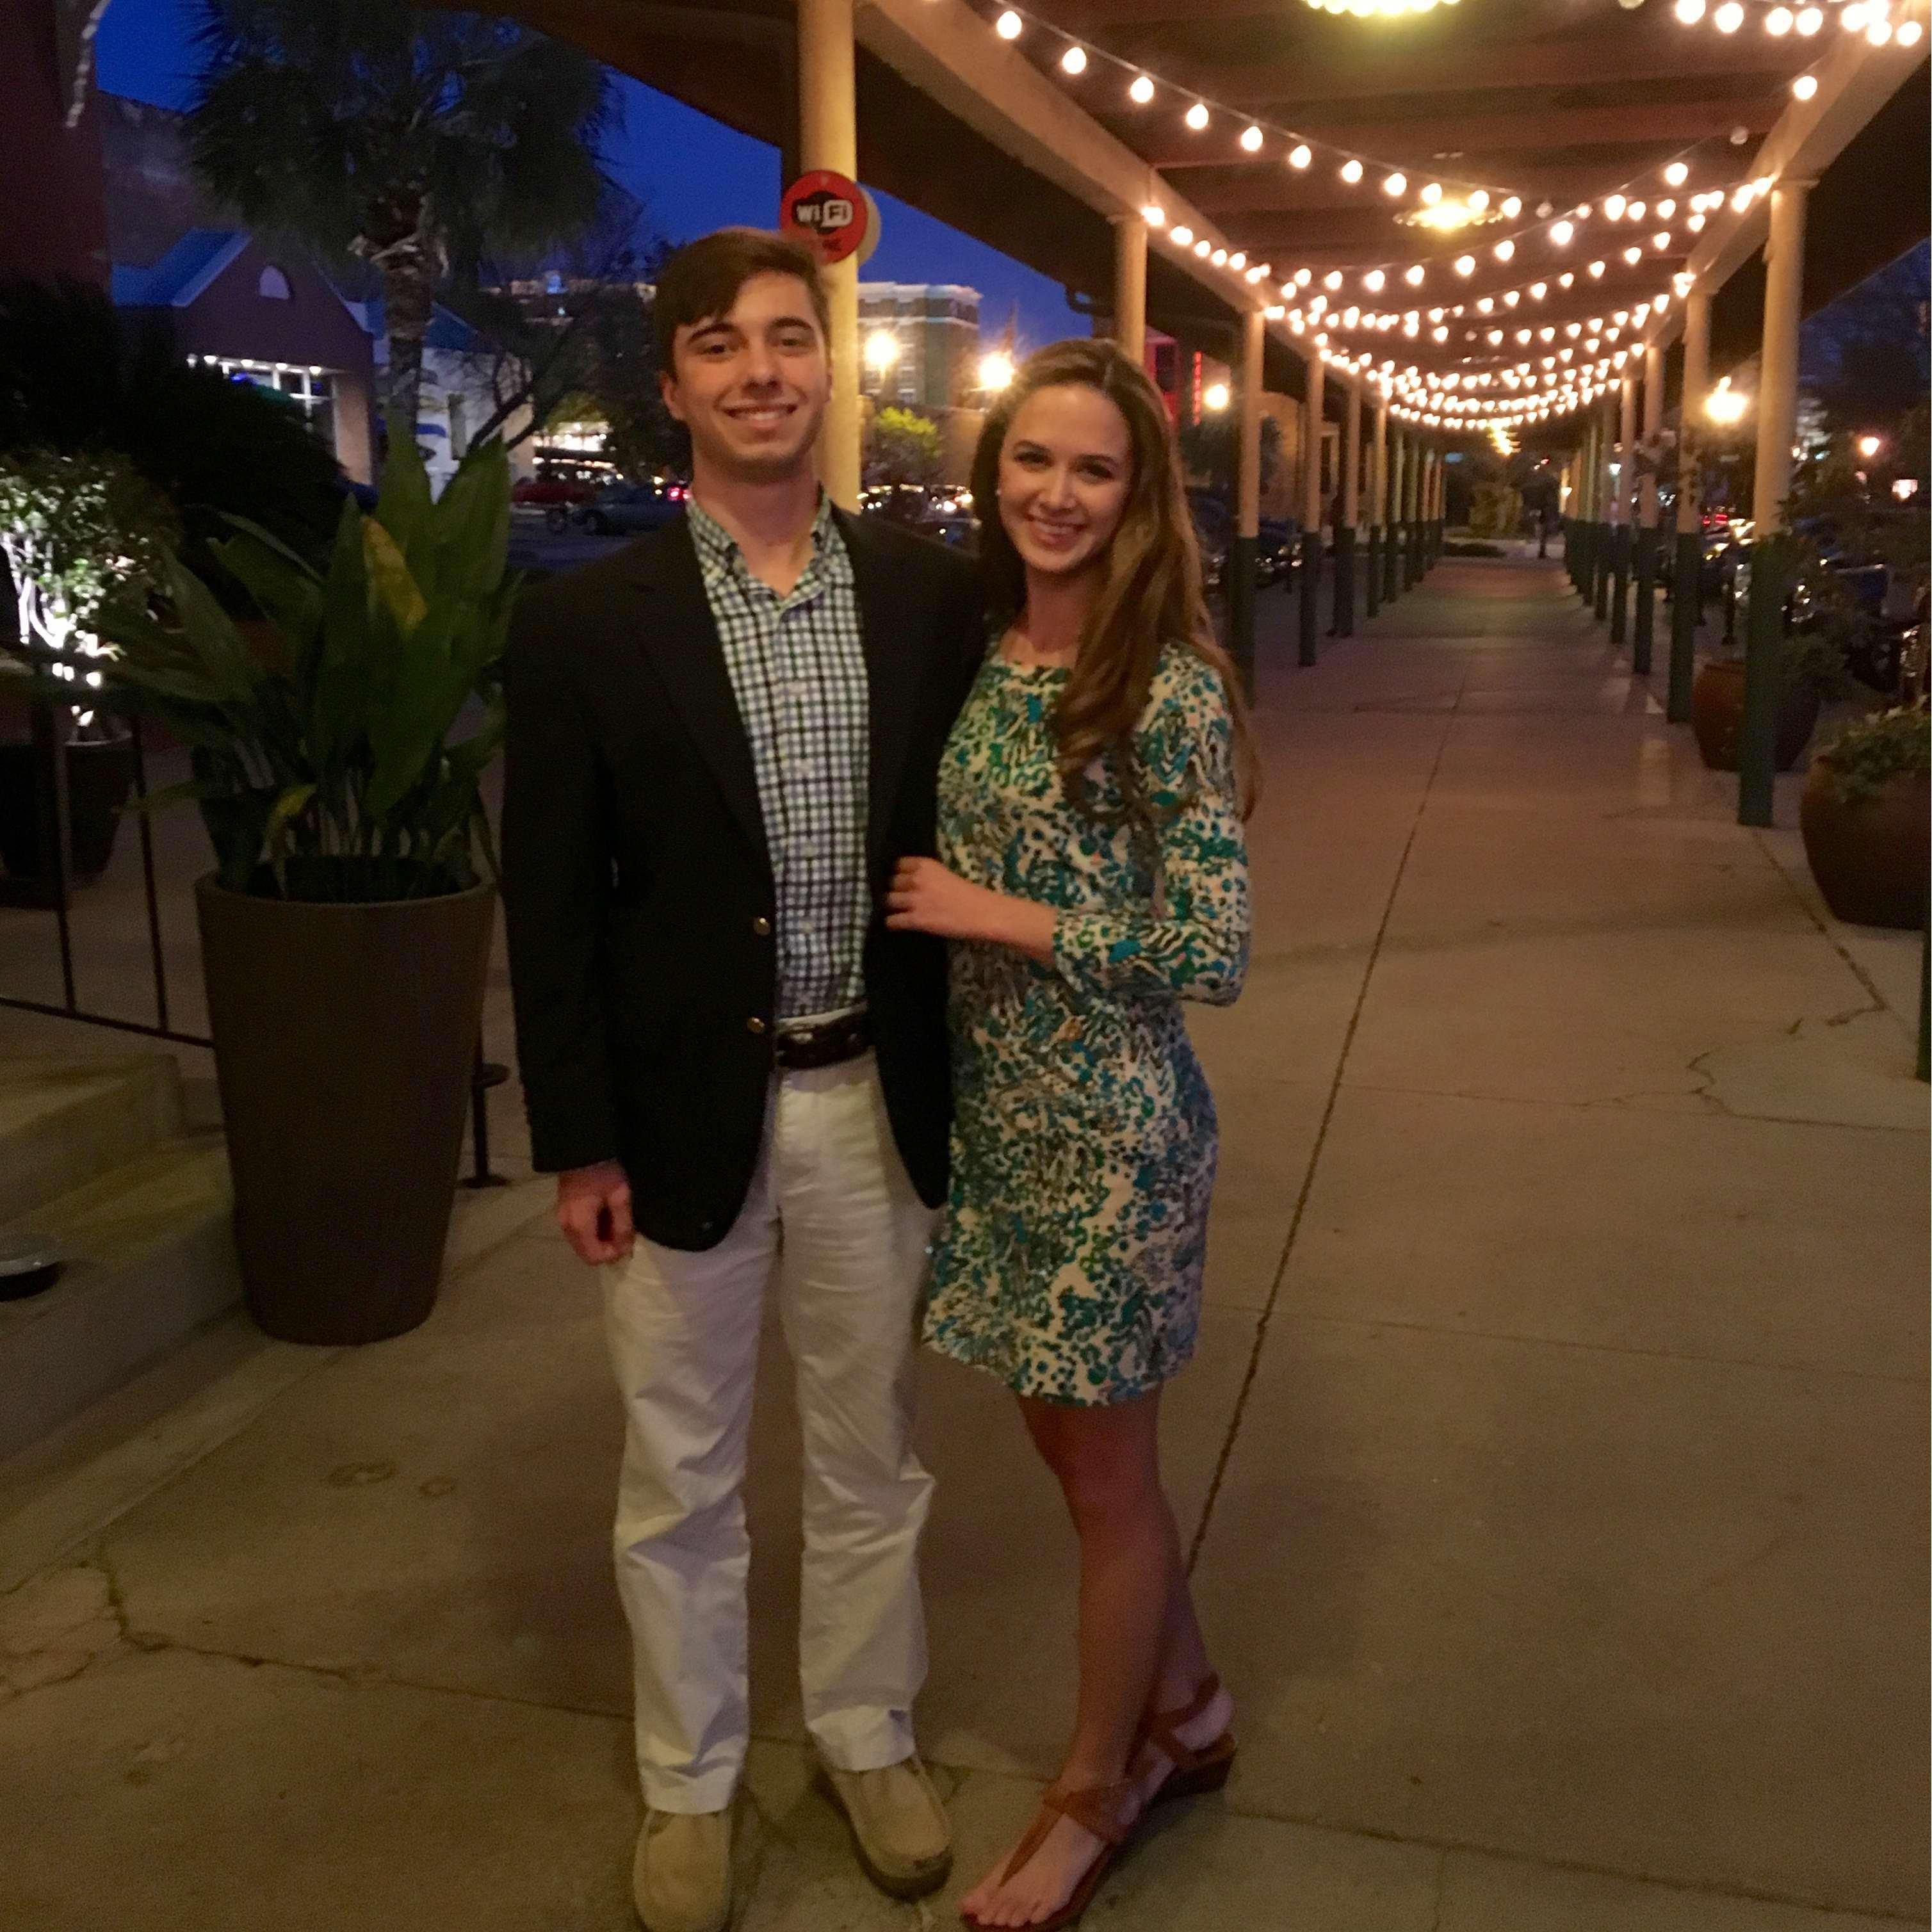 Our first date at Blue Marlin in Columbia, SC.